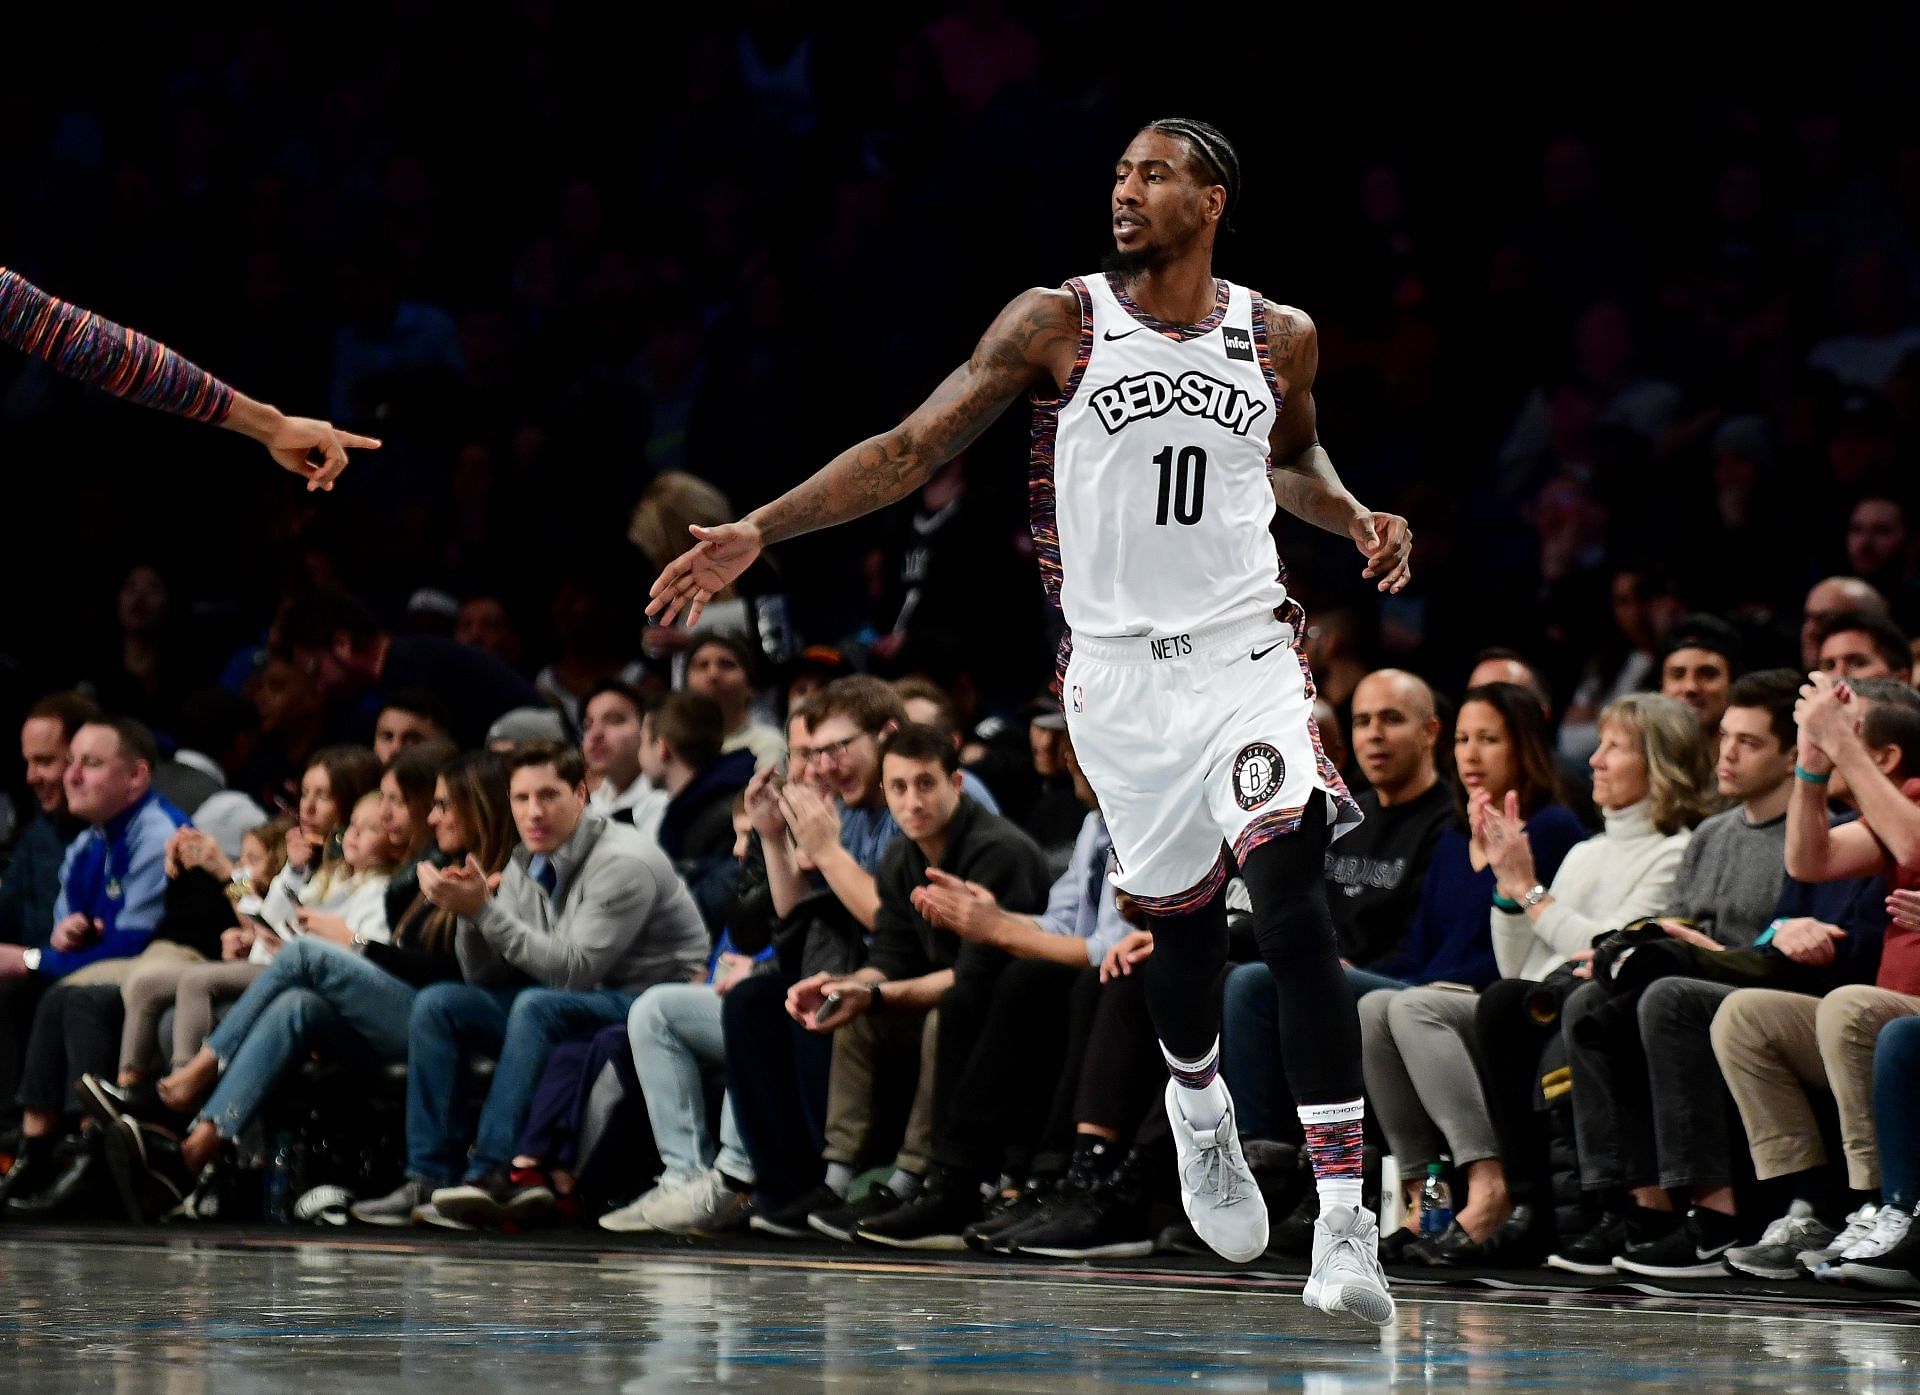 Iman Shumpert last played in the NBA for the Brooklyn Nets